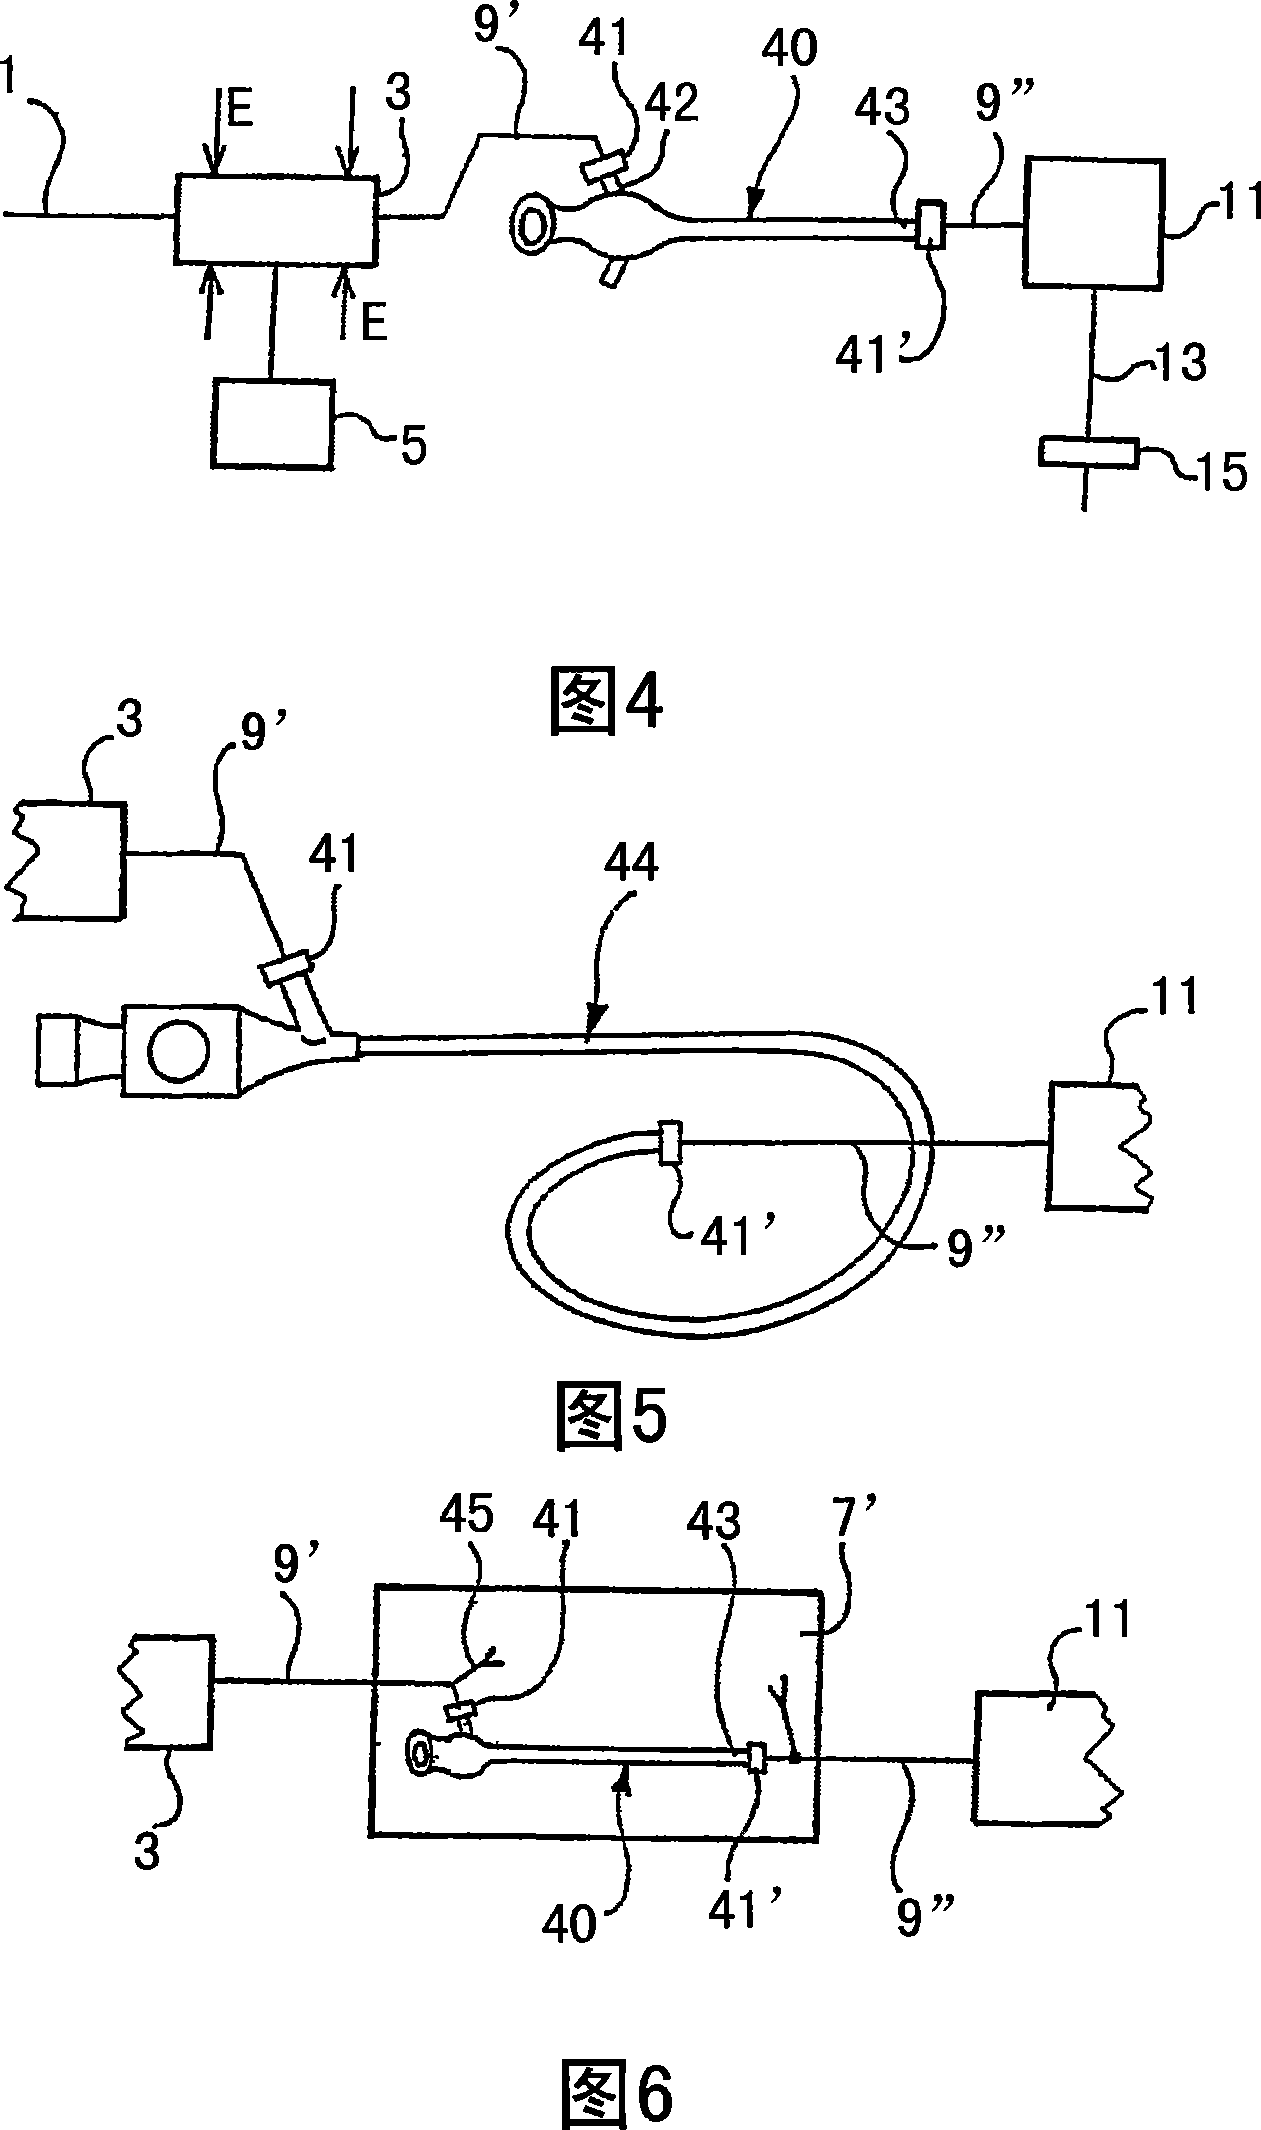 Device for sterilizing with gaseous plasma formed from a mixture of nitrogen and hydrogen